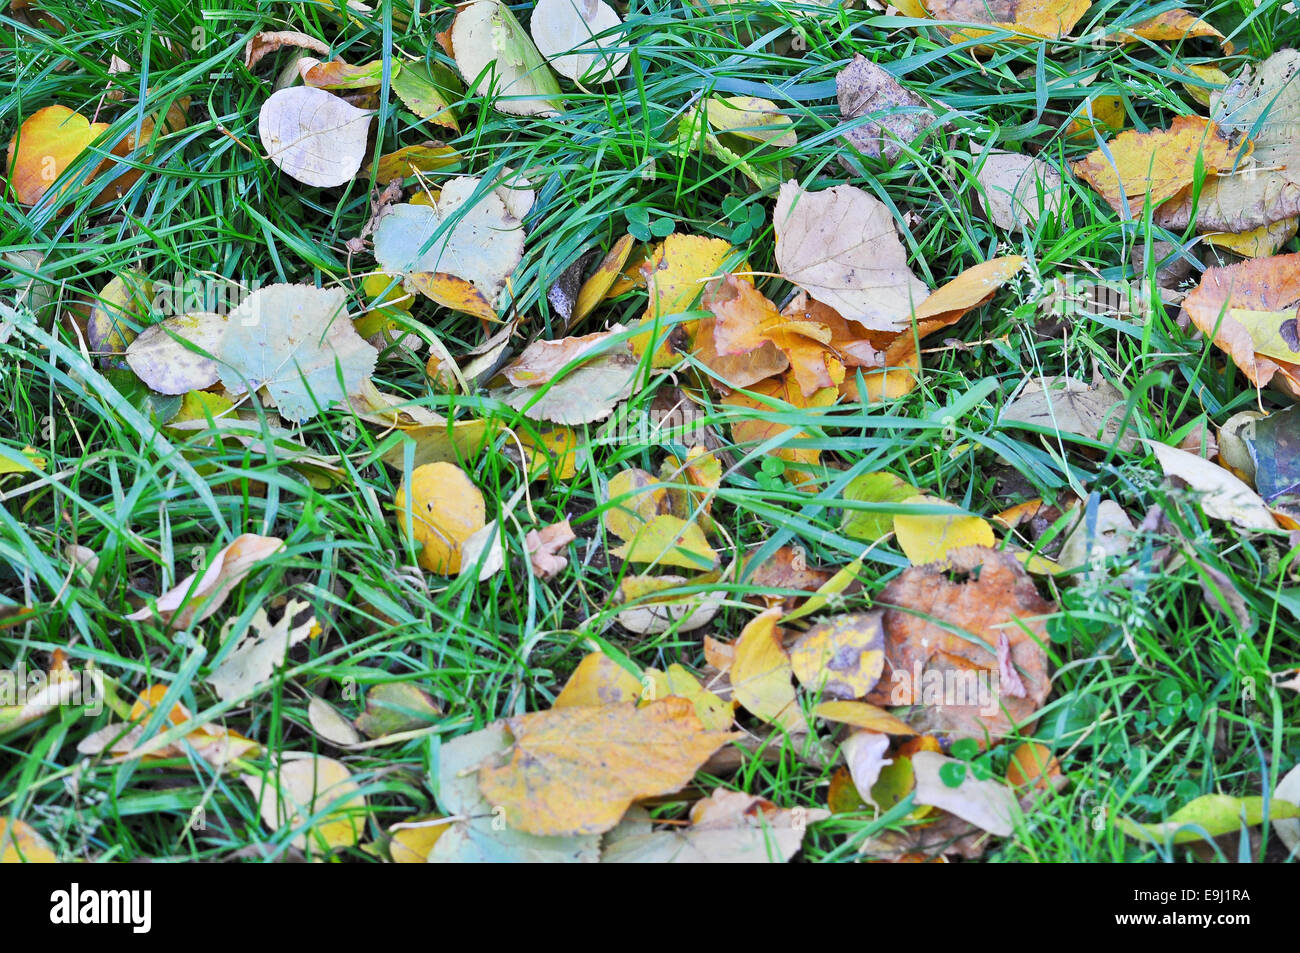 Fallen autumn leaves. A carpet of colorful leaves in October, lying on the grass. Stock Photo